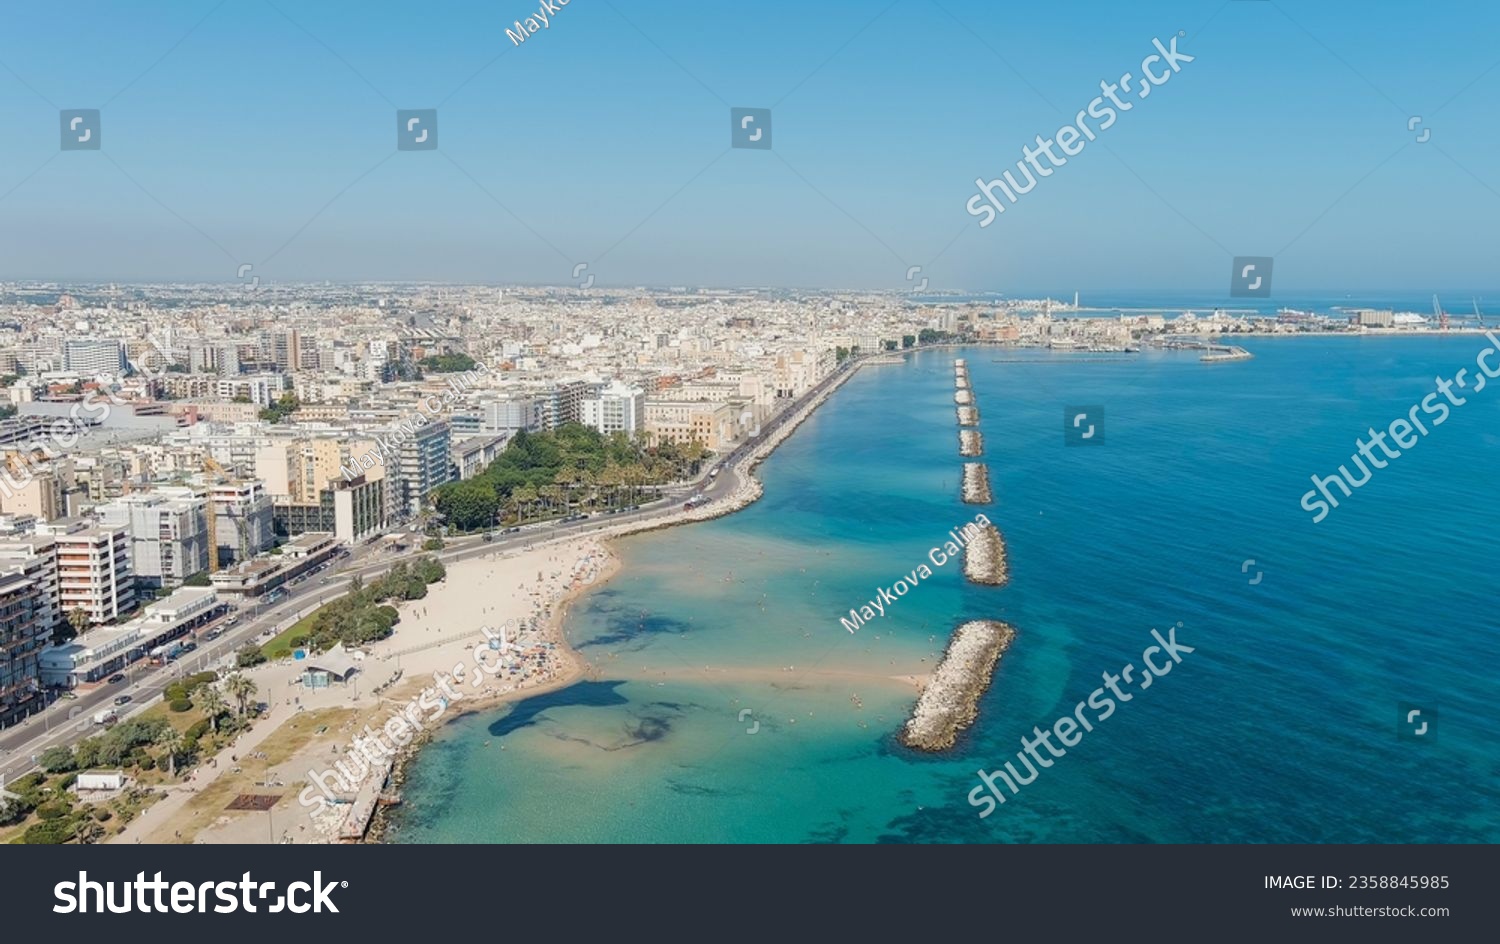 Bari, Italy. The central embankment of the city during the day. Lungomare di Bari. Summer. Bari - a port city on the Adriatic coast, Aerial View   #2358845985